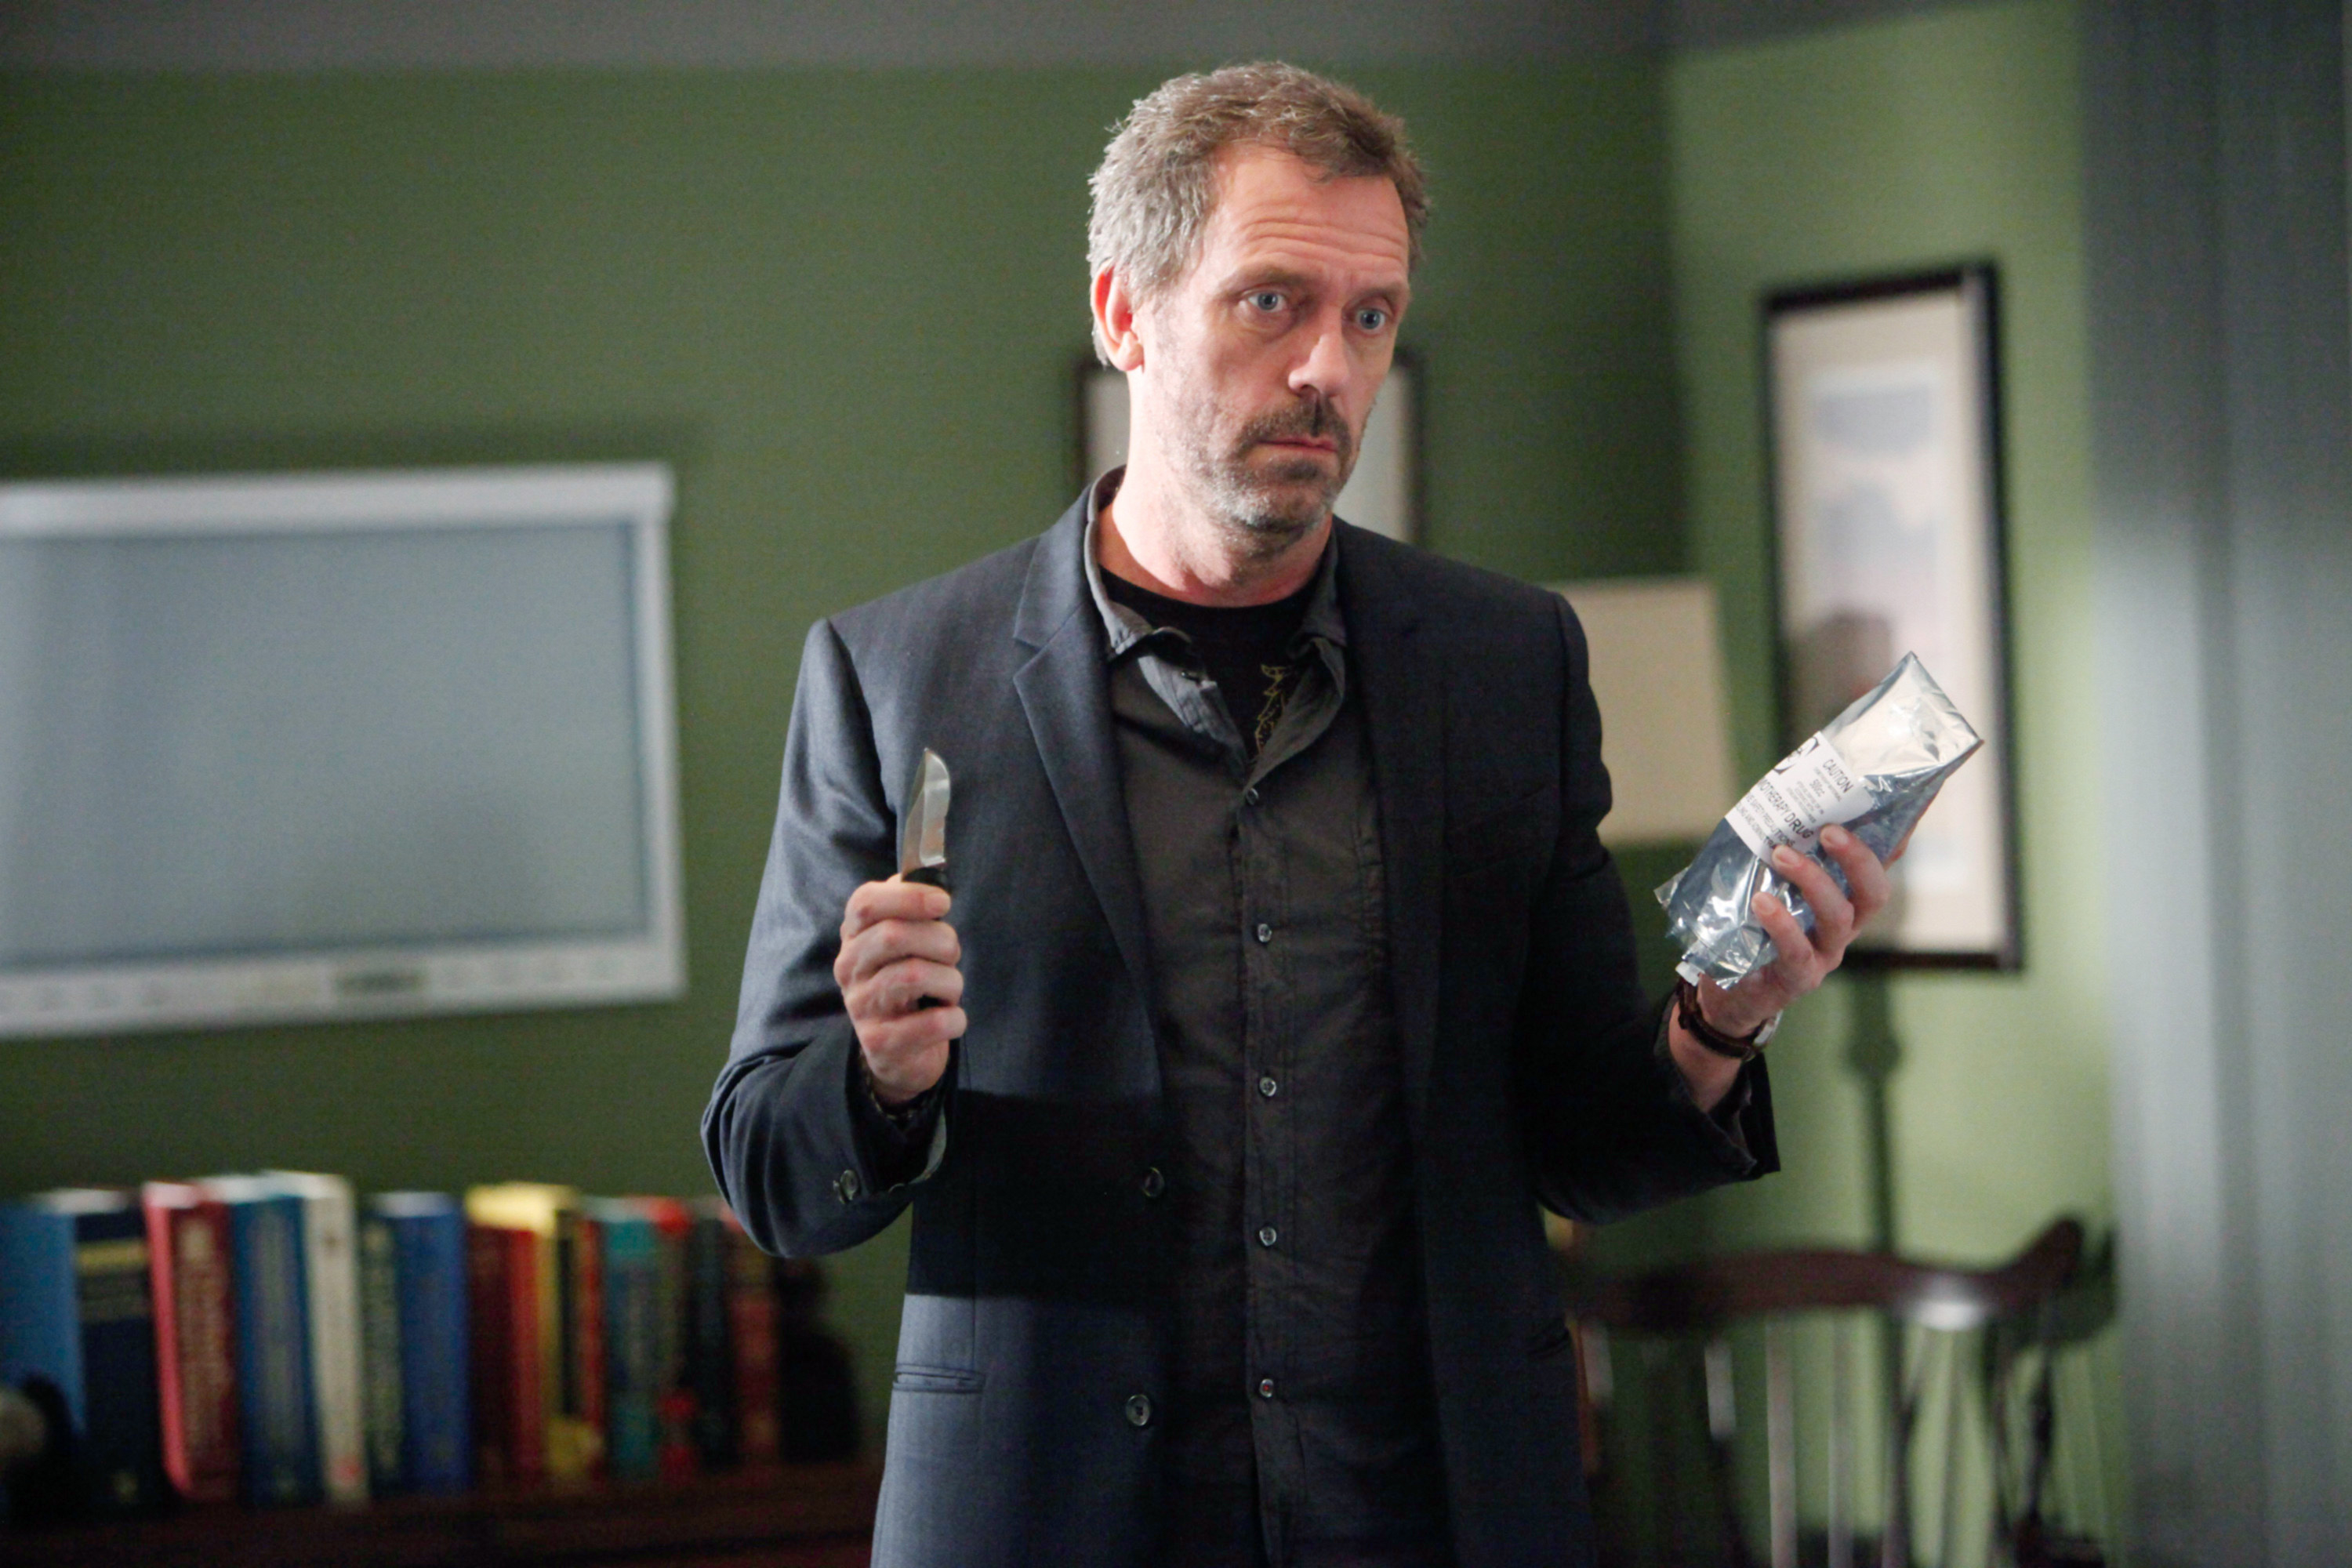 Hugh as House holding a small knife and medical bag